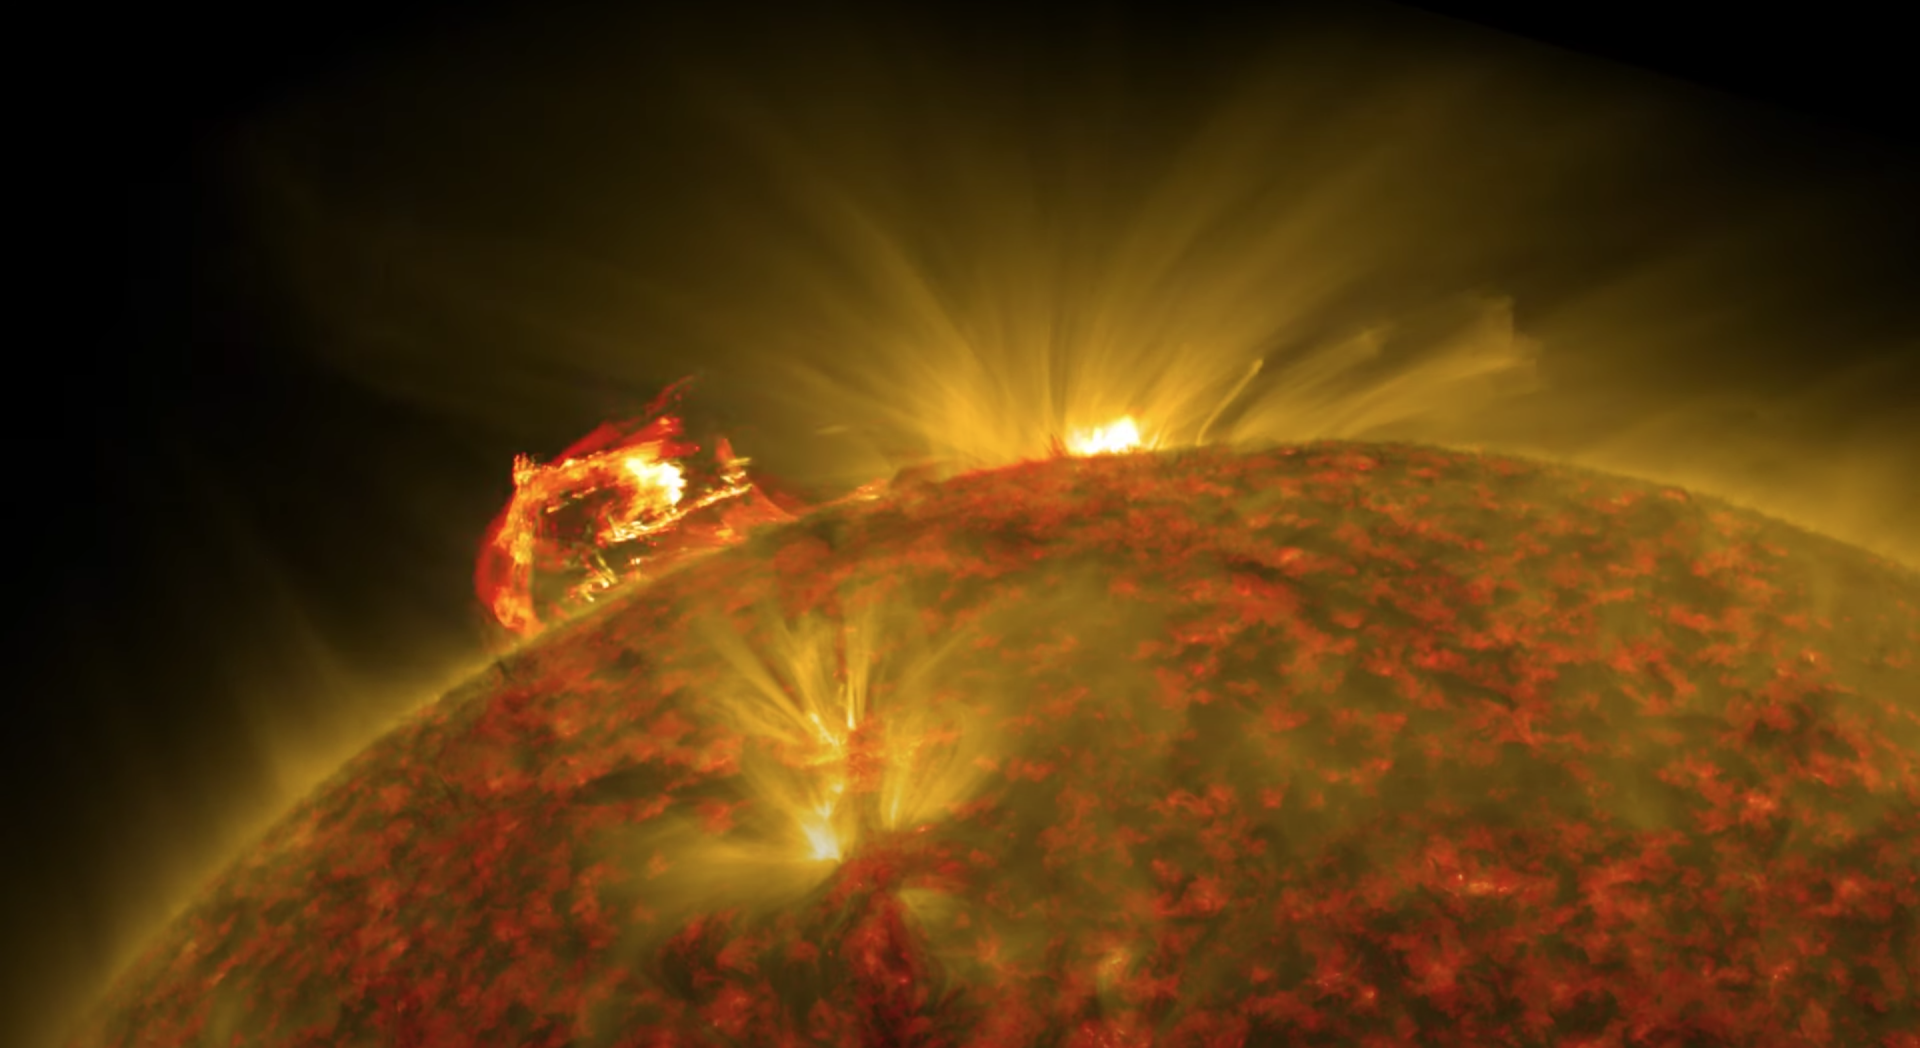 NASA's Solar Dynamics Observatory captured stunning imagery of a solar flare.